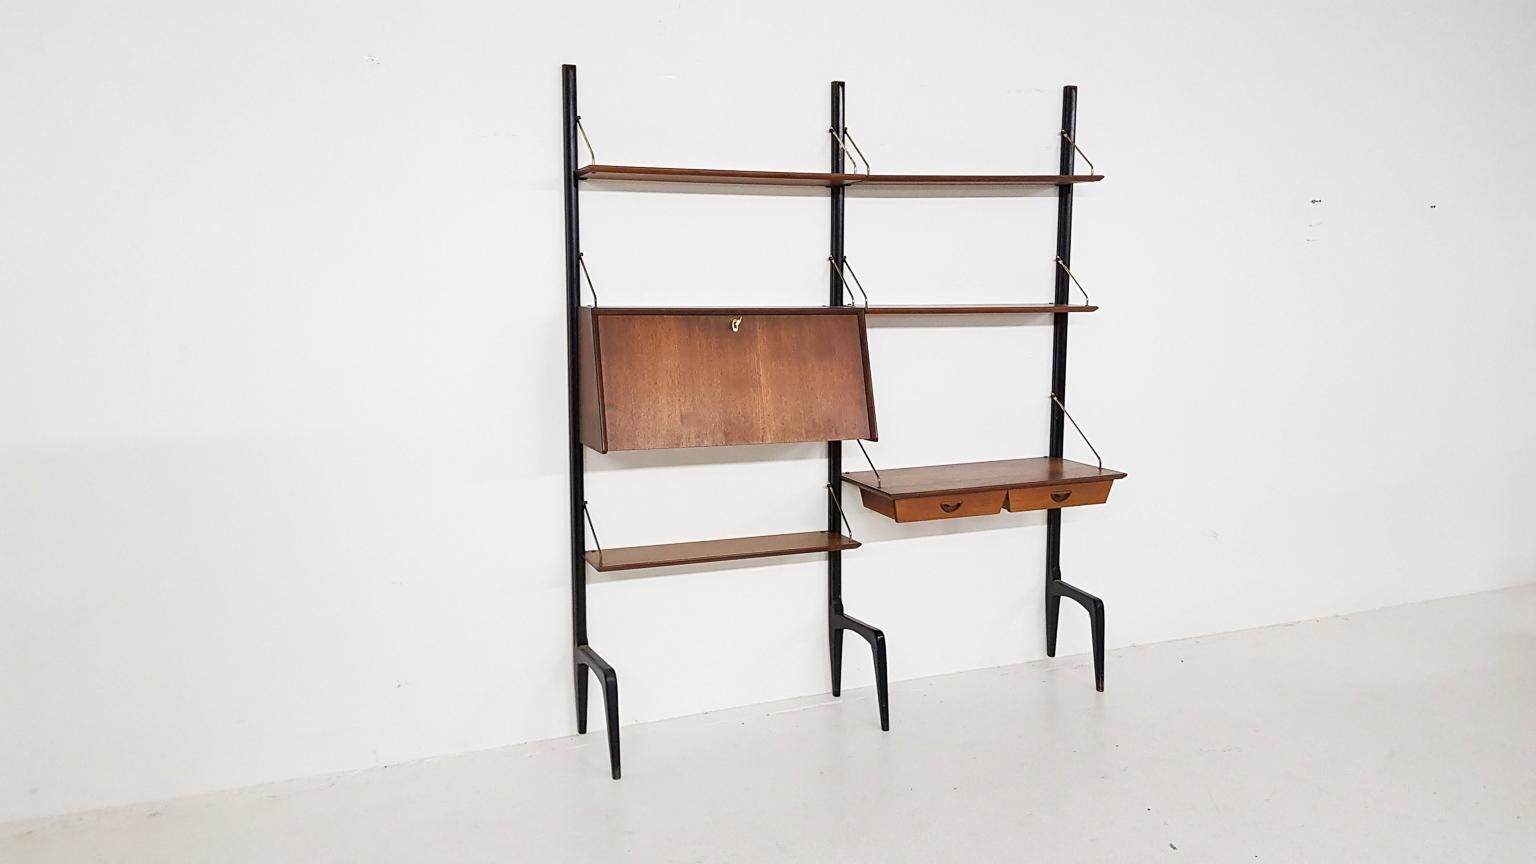 Shelving system, wall unit or bookcase designed by Dutch furniture designer Louis Van Teeffelen for Wébé the Netherlands in the 1950s.

This wall unit or shelving system has to be one of the finest storage designs from the Dutch, midcentury. In